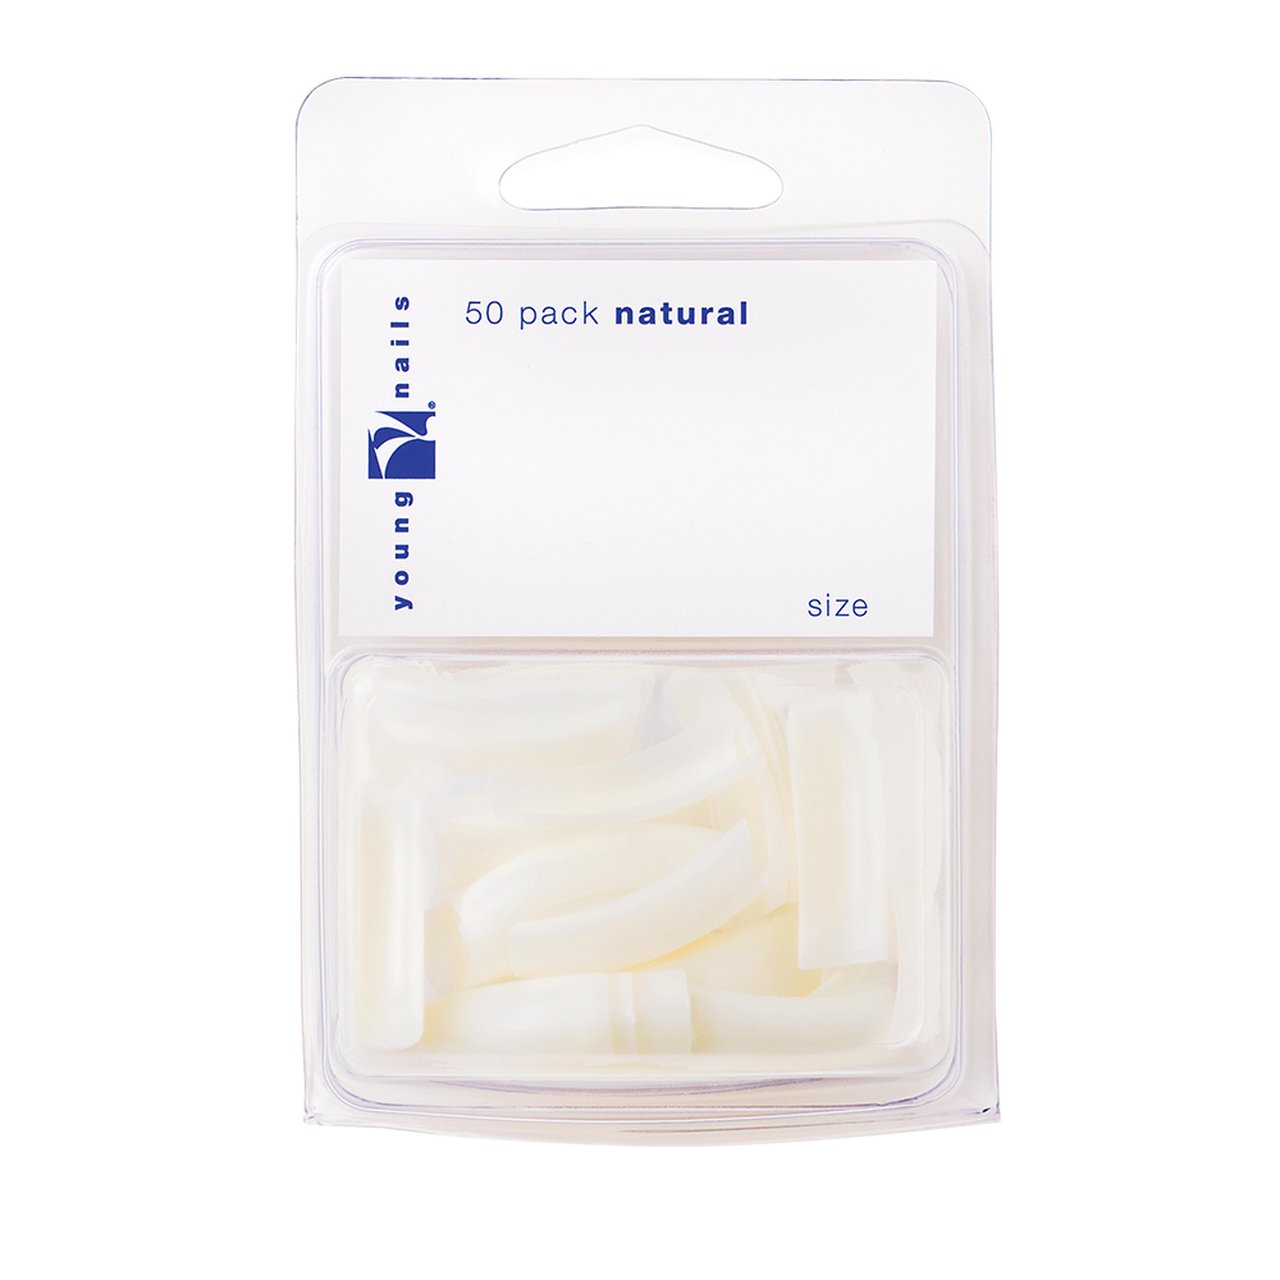 Natural Tips 50 Pack Refill #5